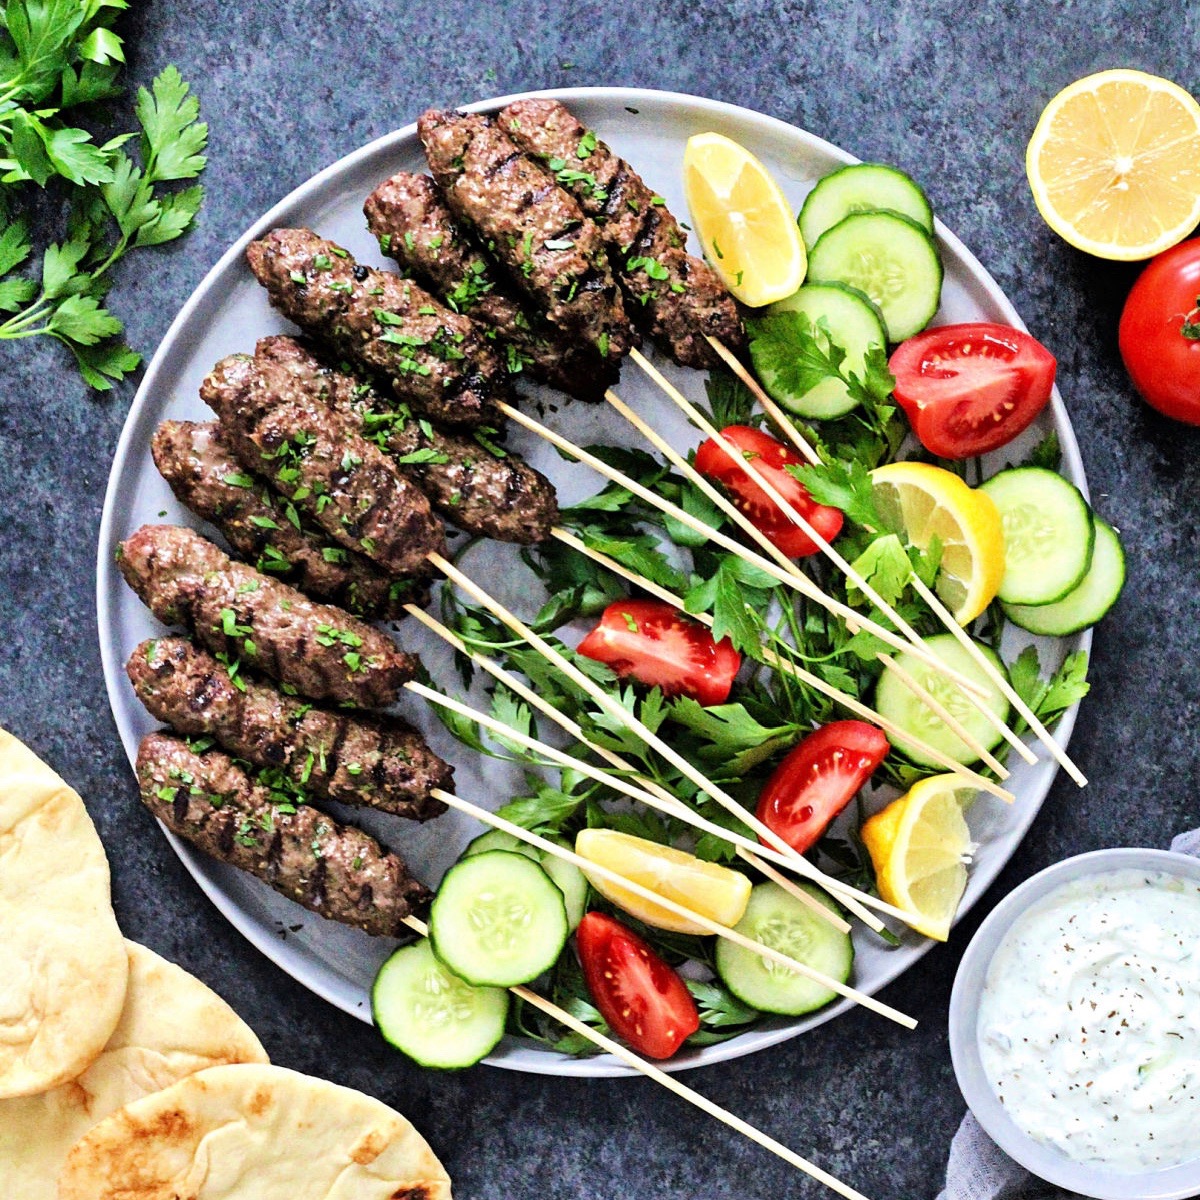 Beef kofte with spiced tomato sauce